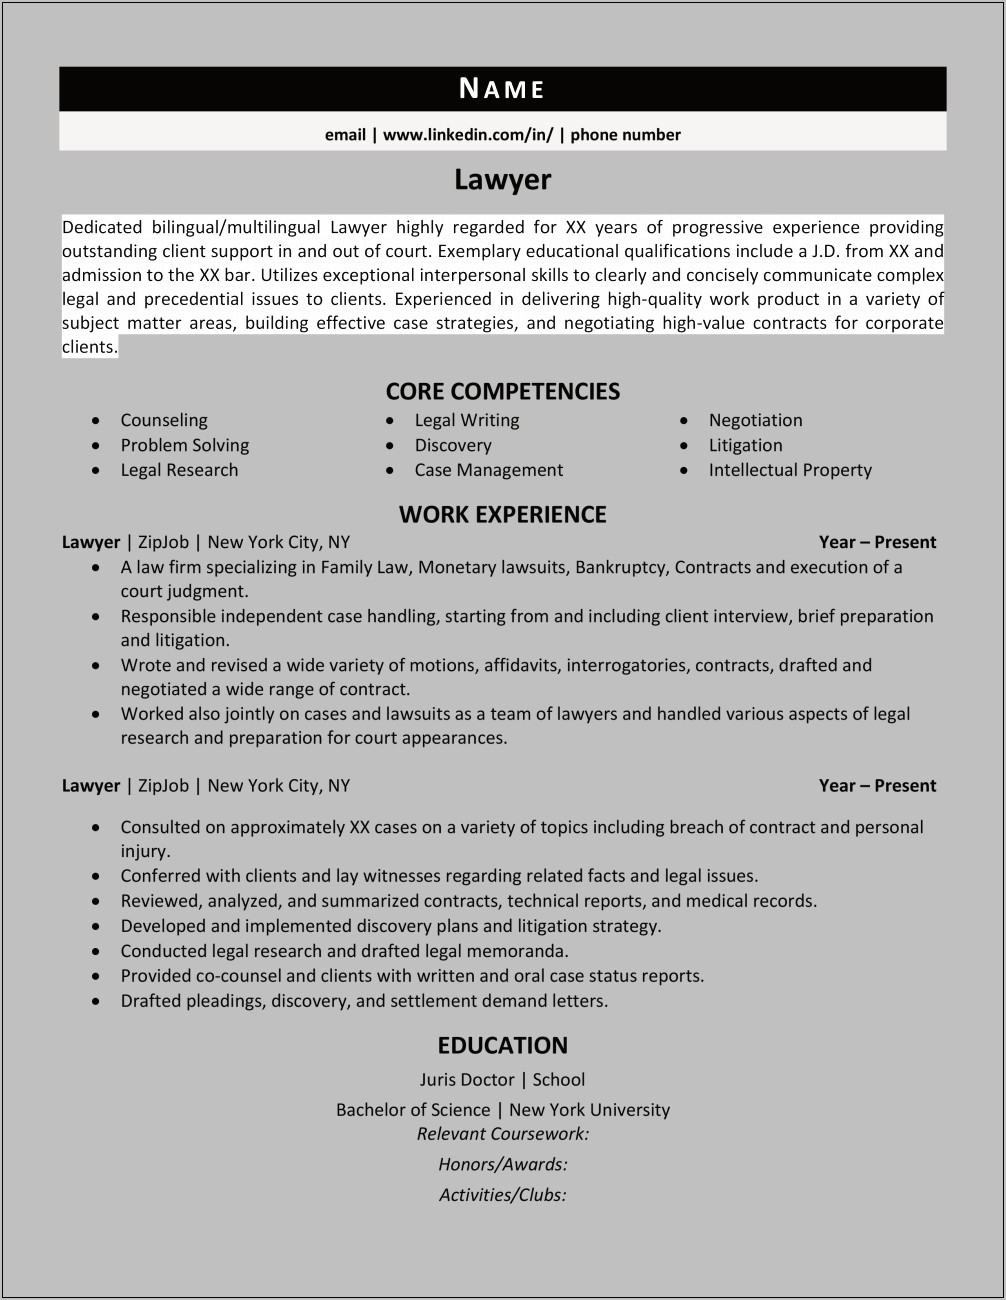 Examples Of Resume Summary For Lawyers